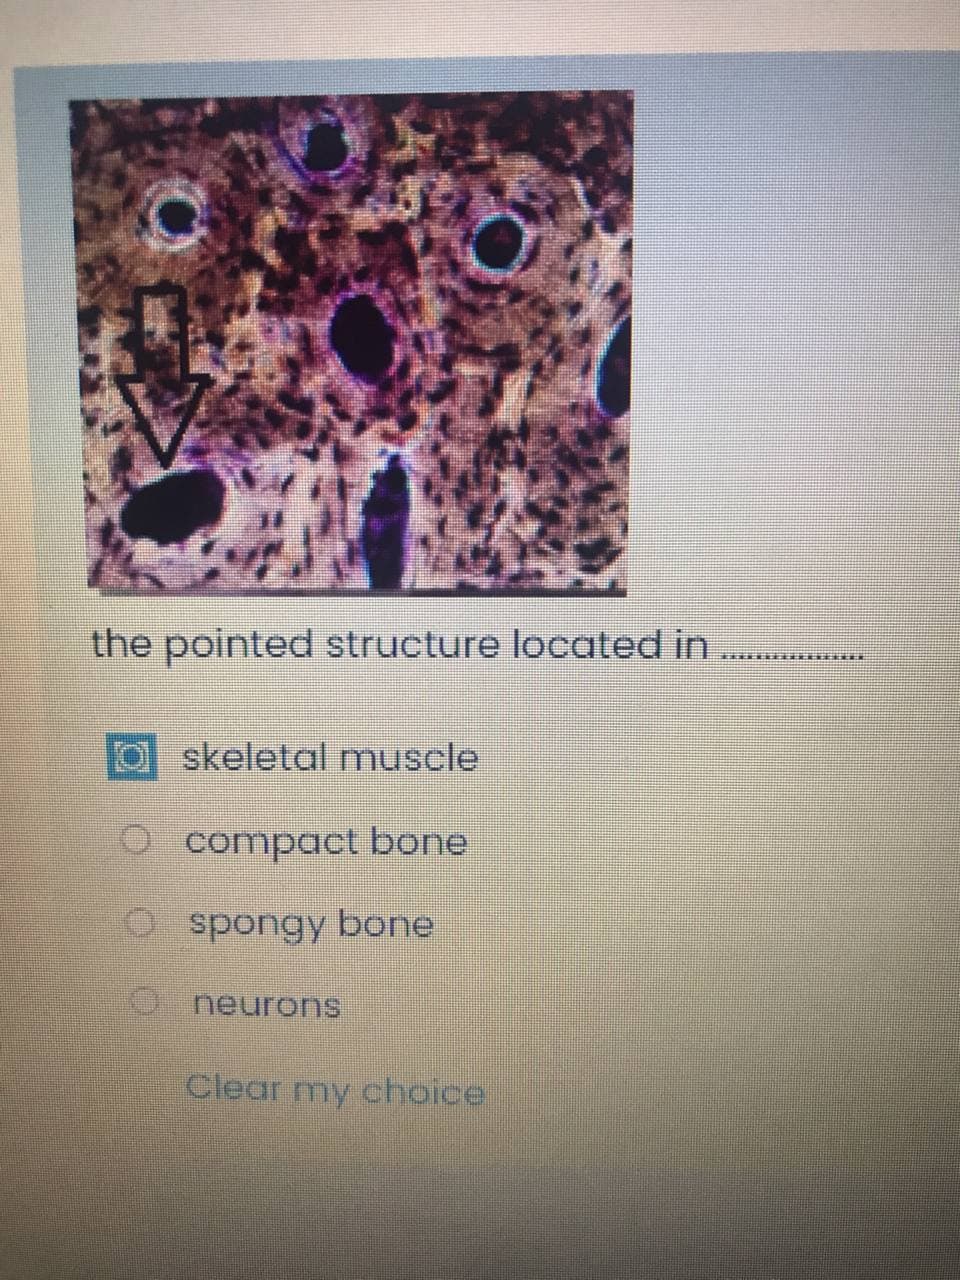 the pointed structure located in
skeletal muscle
O compact bone
O spongy bone
neurons
Clear my choice
